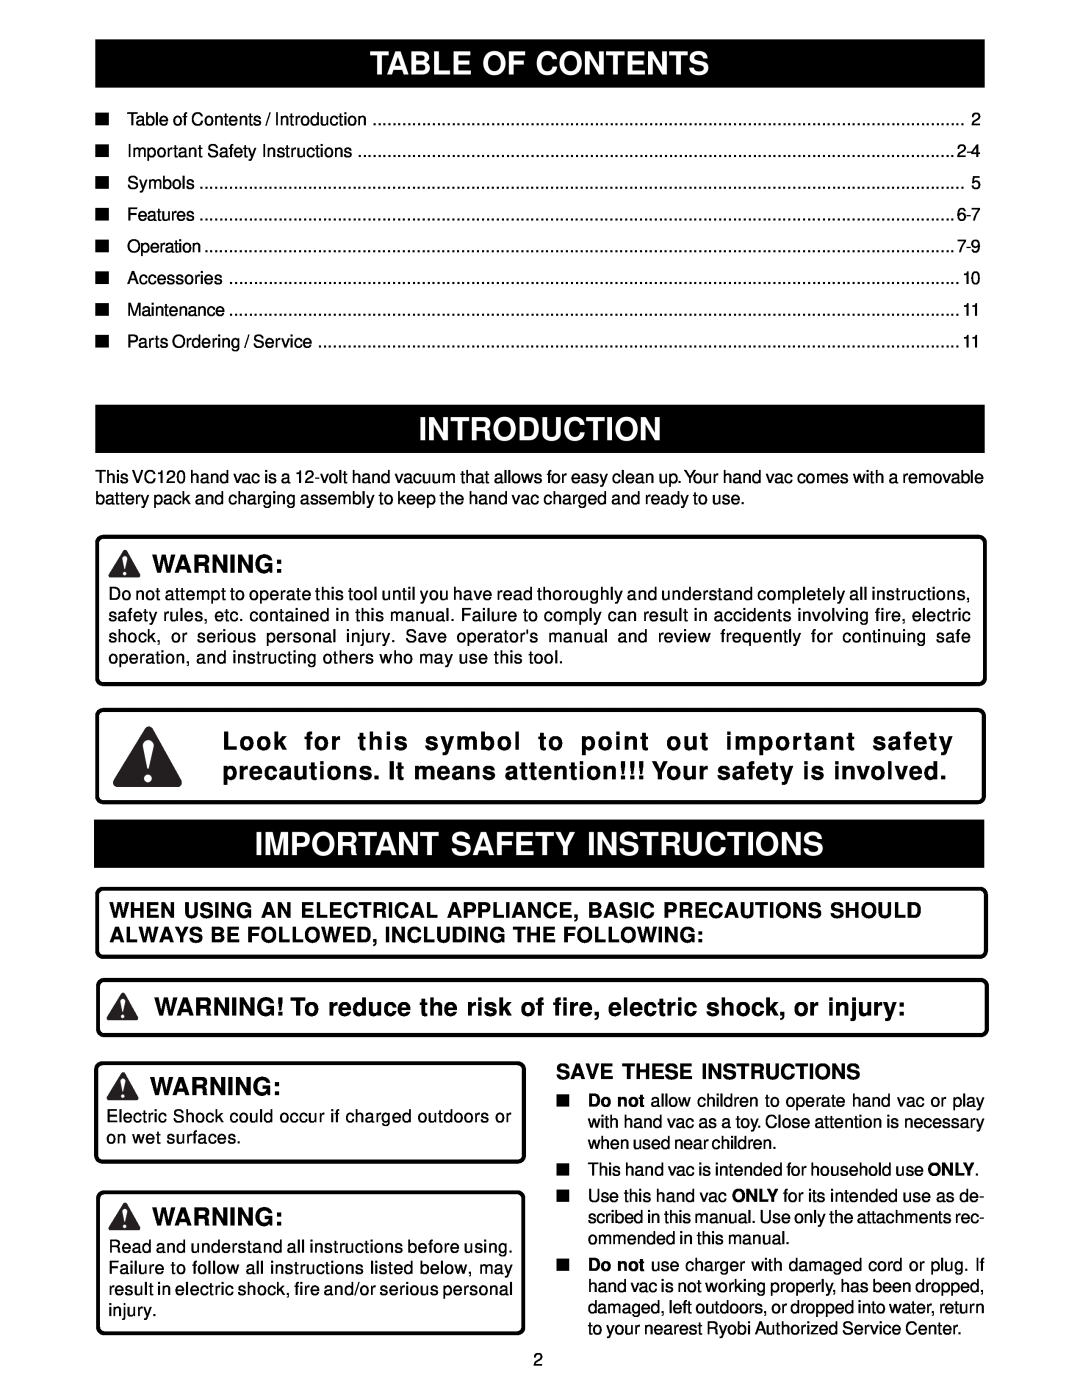 Ryobi VC120 manual Table Of Contents, Introduction, Important Safety Instructions, Save These Instructions 